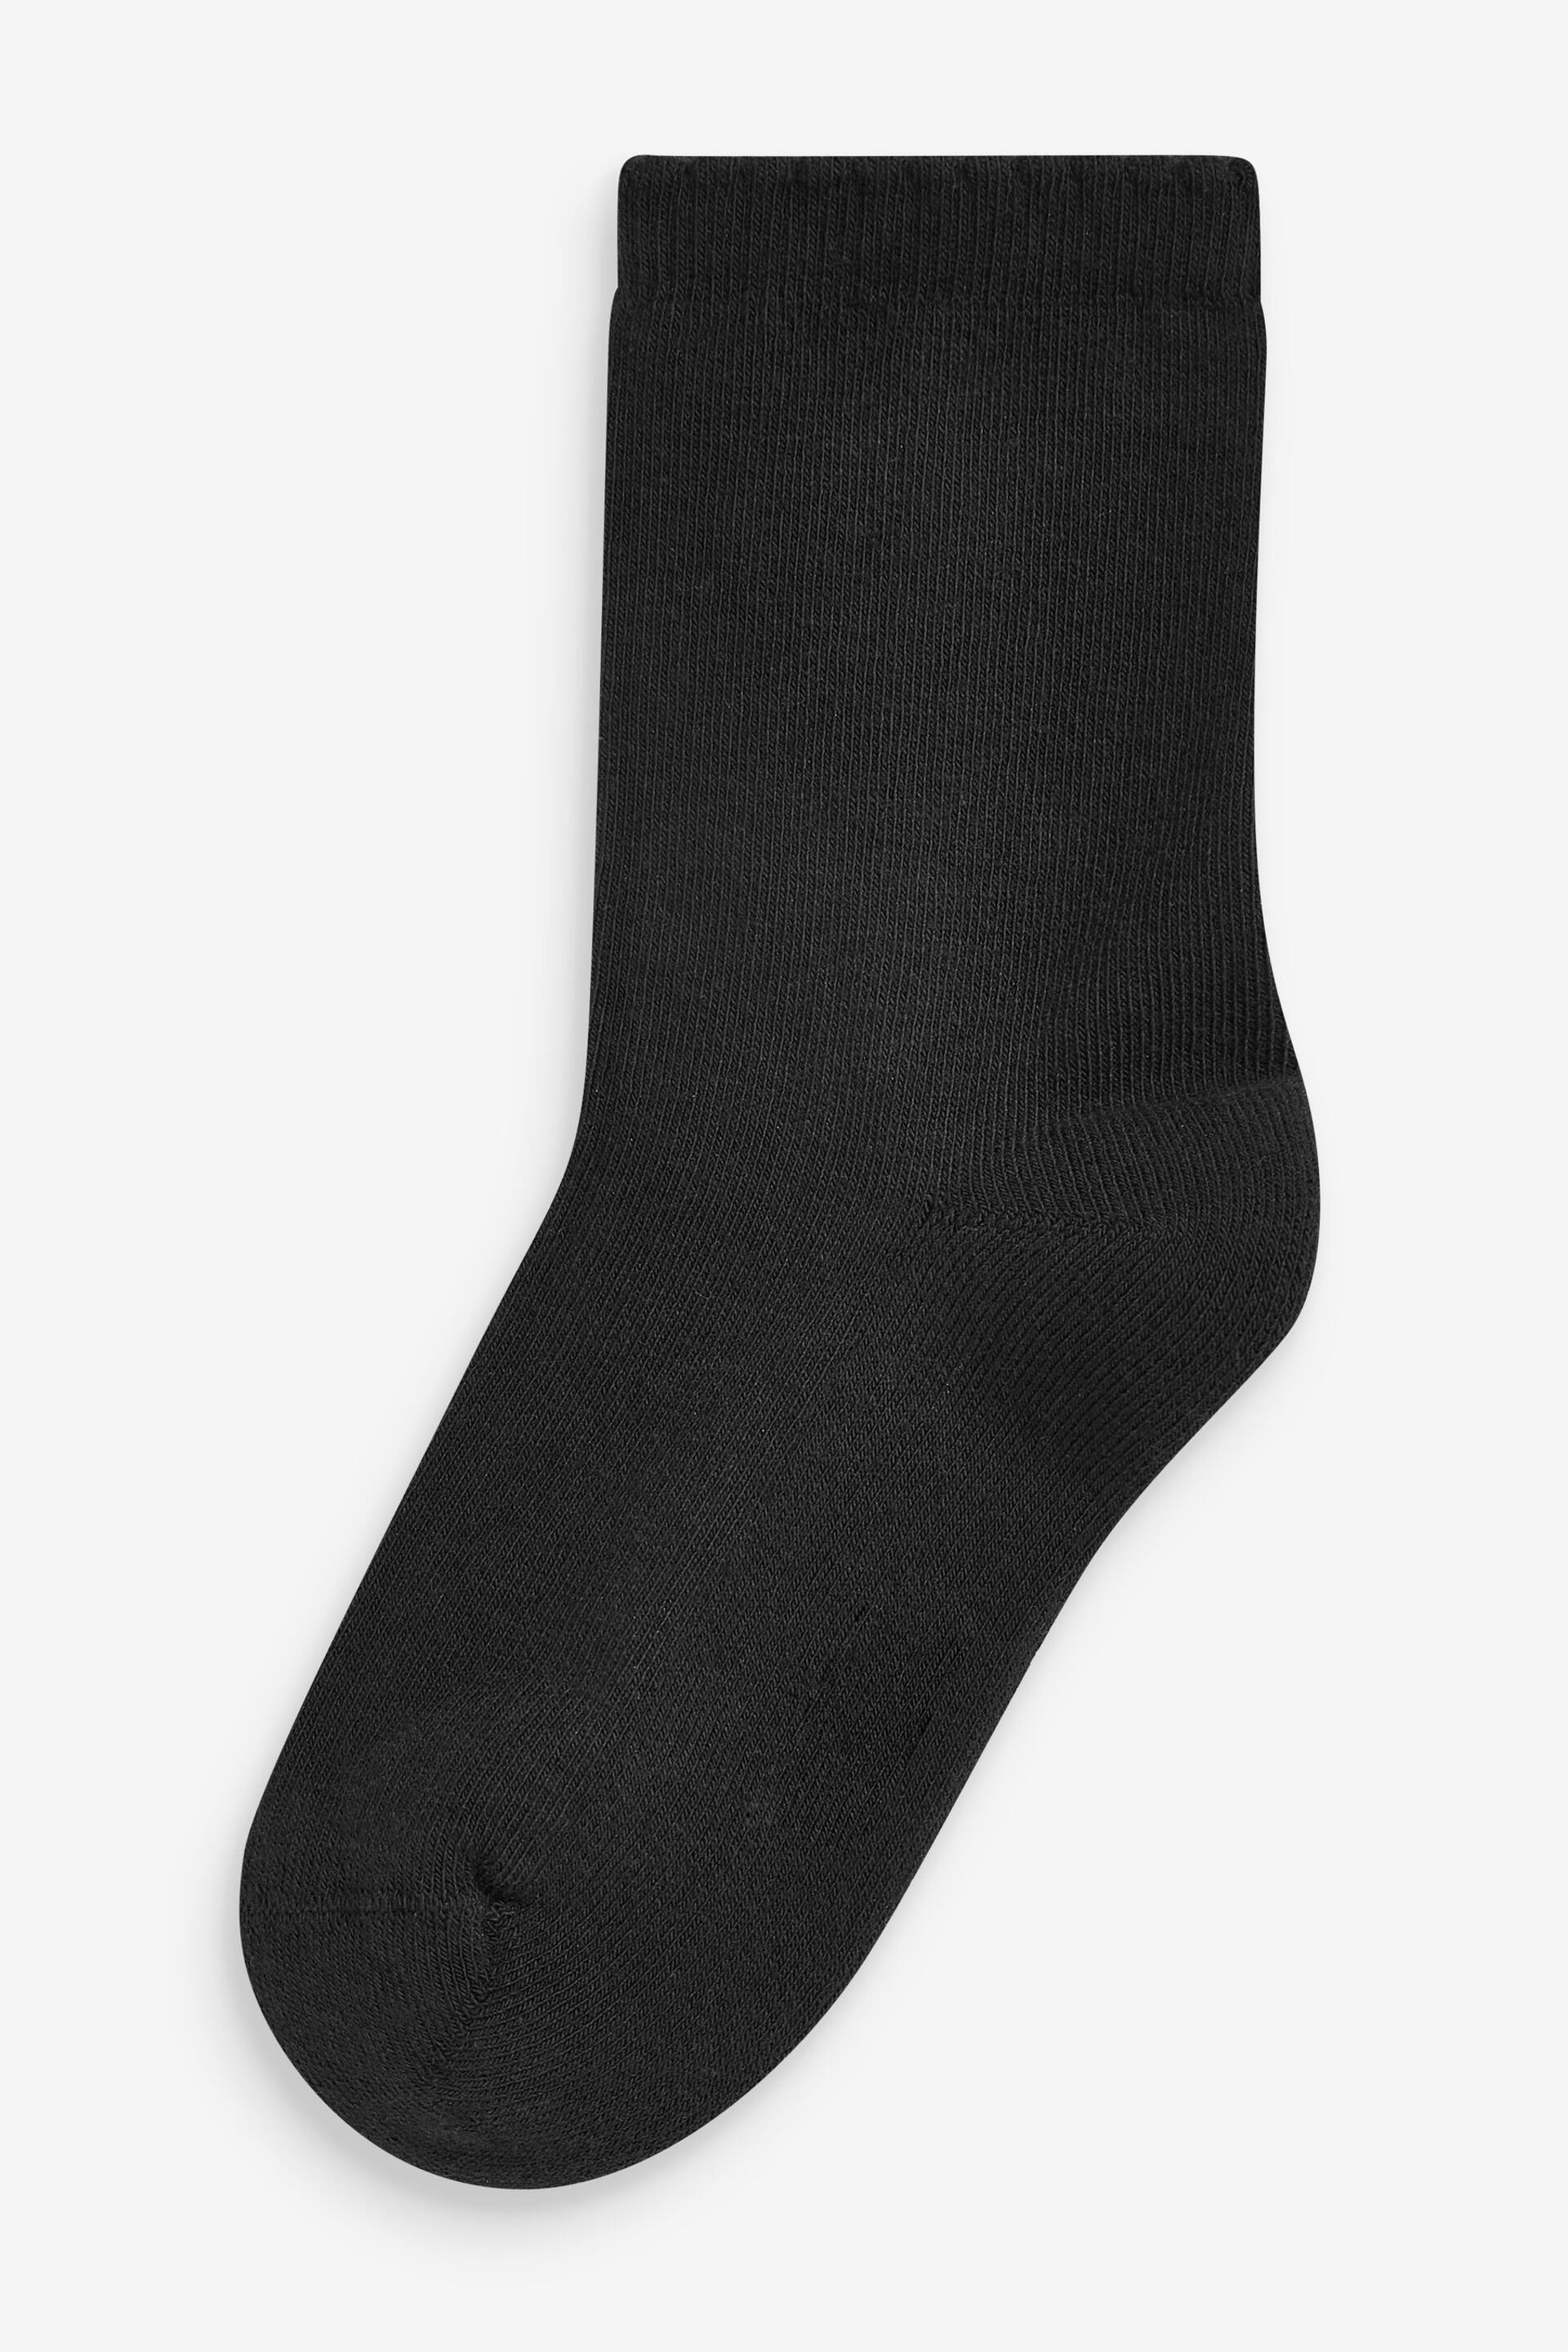 Black 5 Pack Cotton Rich Cushioned Sole Ankle Socks - Image 2 of 3